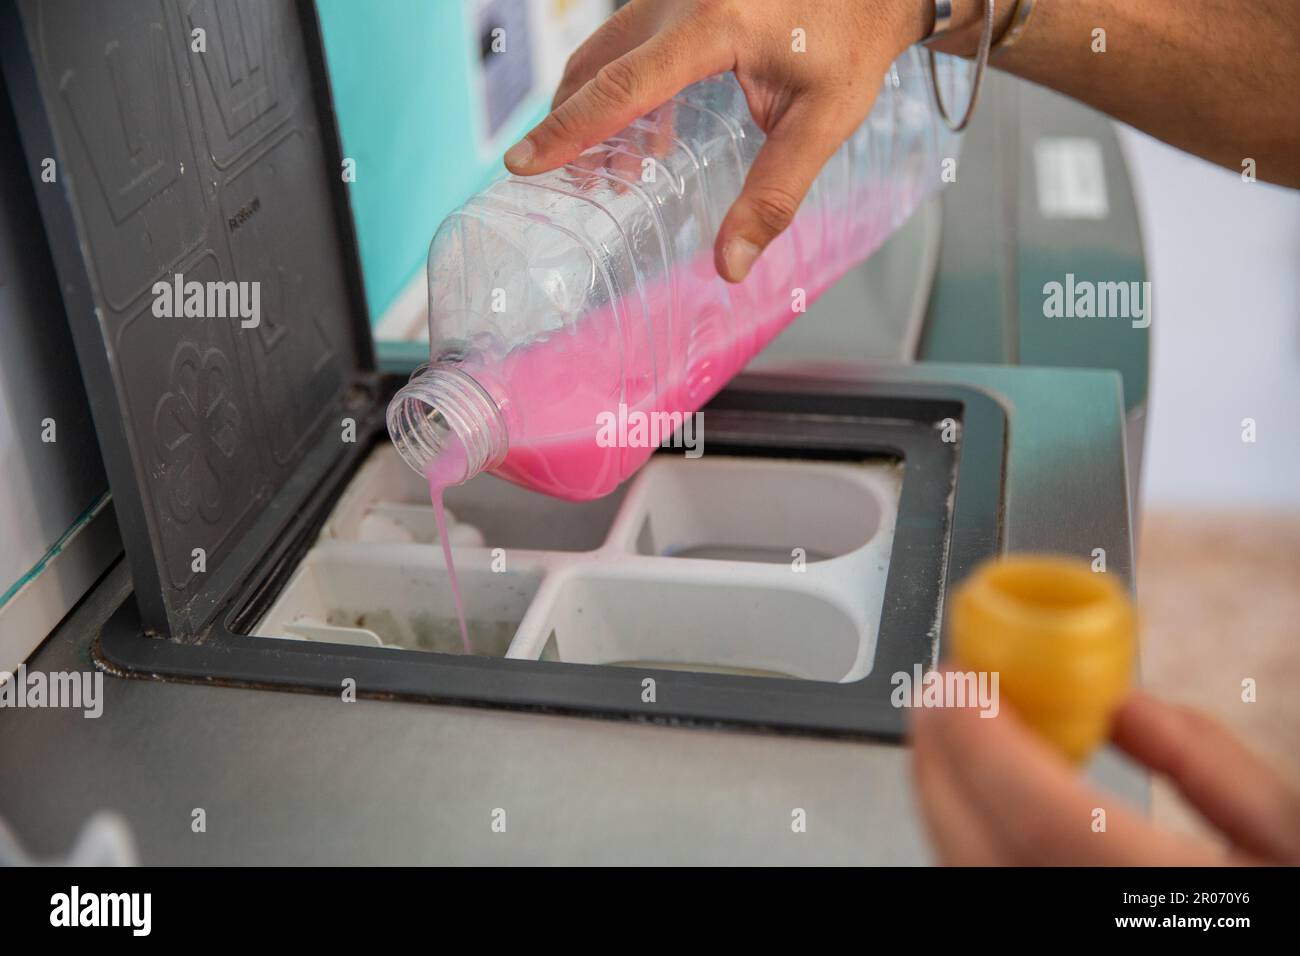 A man pours detergent for washing clothes into the washing machine in a laundromat. Stock Photo